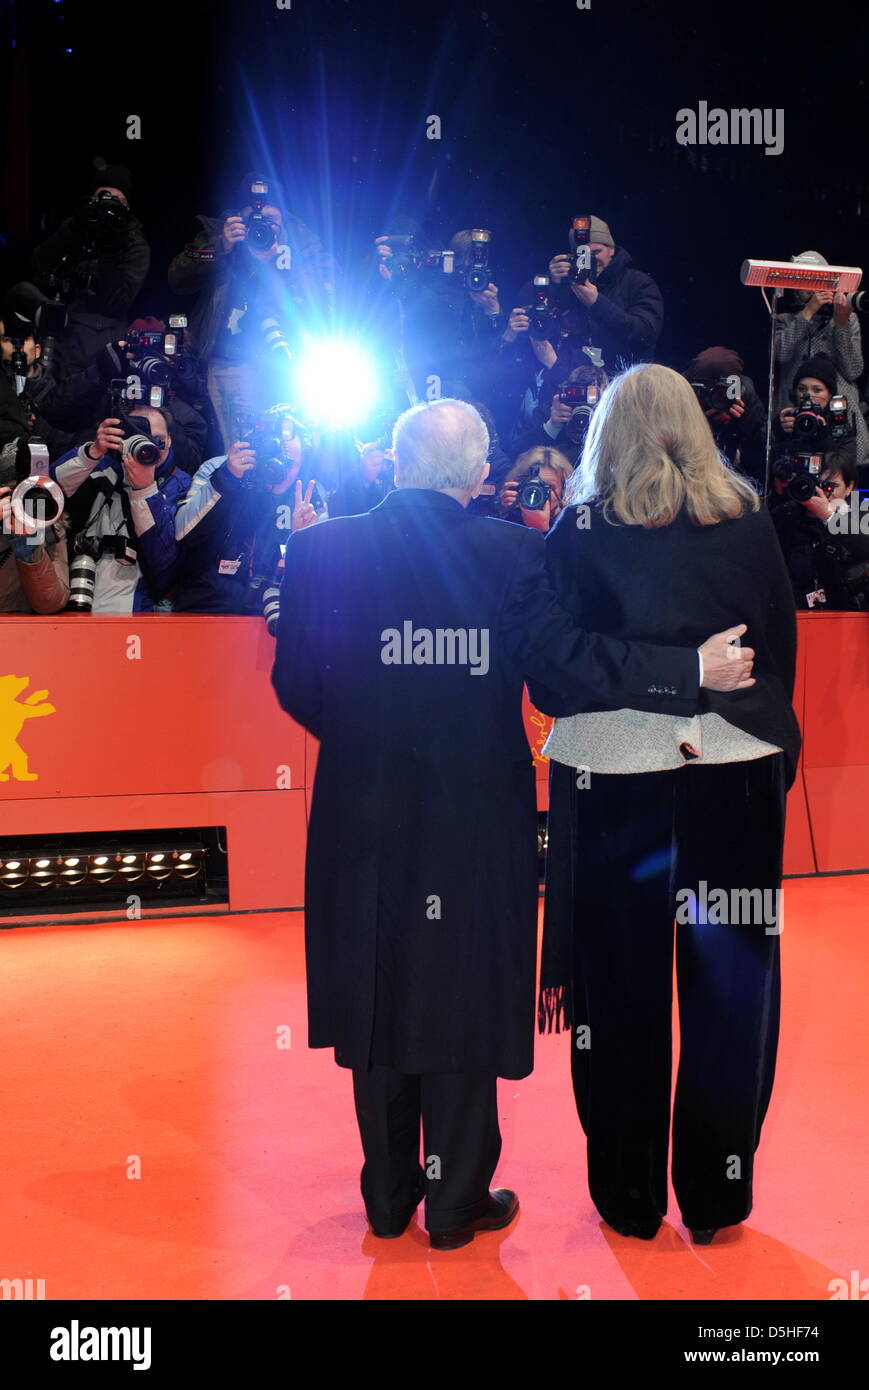 US director Martin Scorsese and his wife Helen Morris arrive for the premiere of the film 'Shutter Island', running in the festival, but not competing for the Golden Bear, during the 60th Berlinale International Film Festival in Berlin, Germany, on Saturday 13 February 2010. The festival runs until 21 Febuary 2010. Photo: Tim Brakemeier dpa/lbn Stock Photo